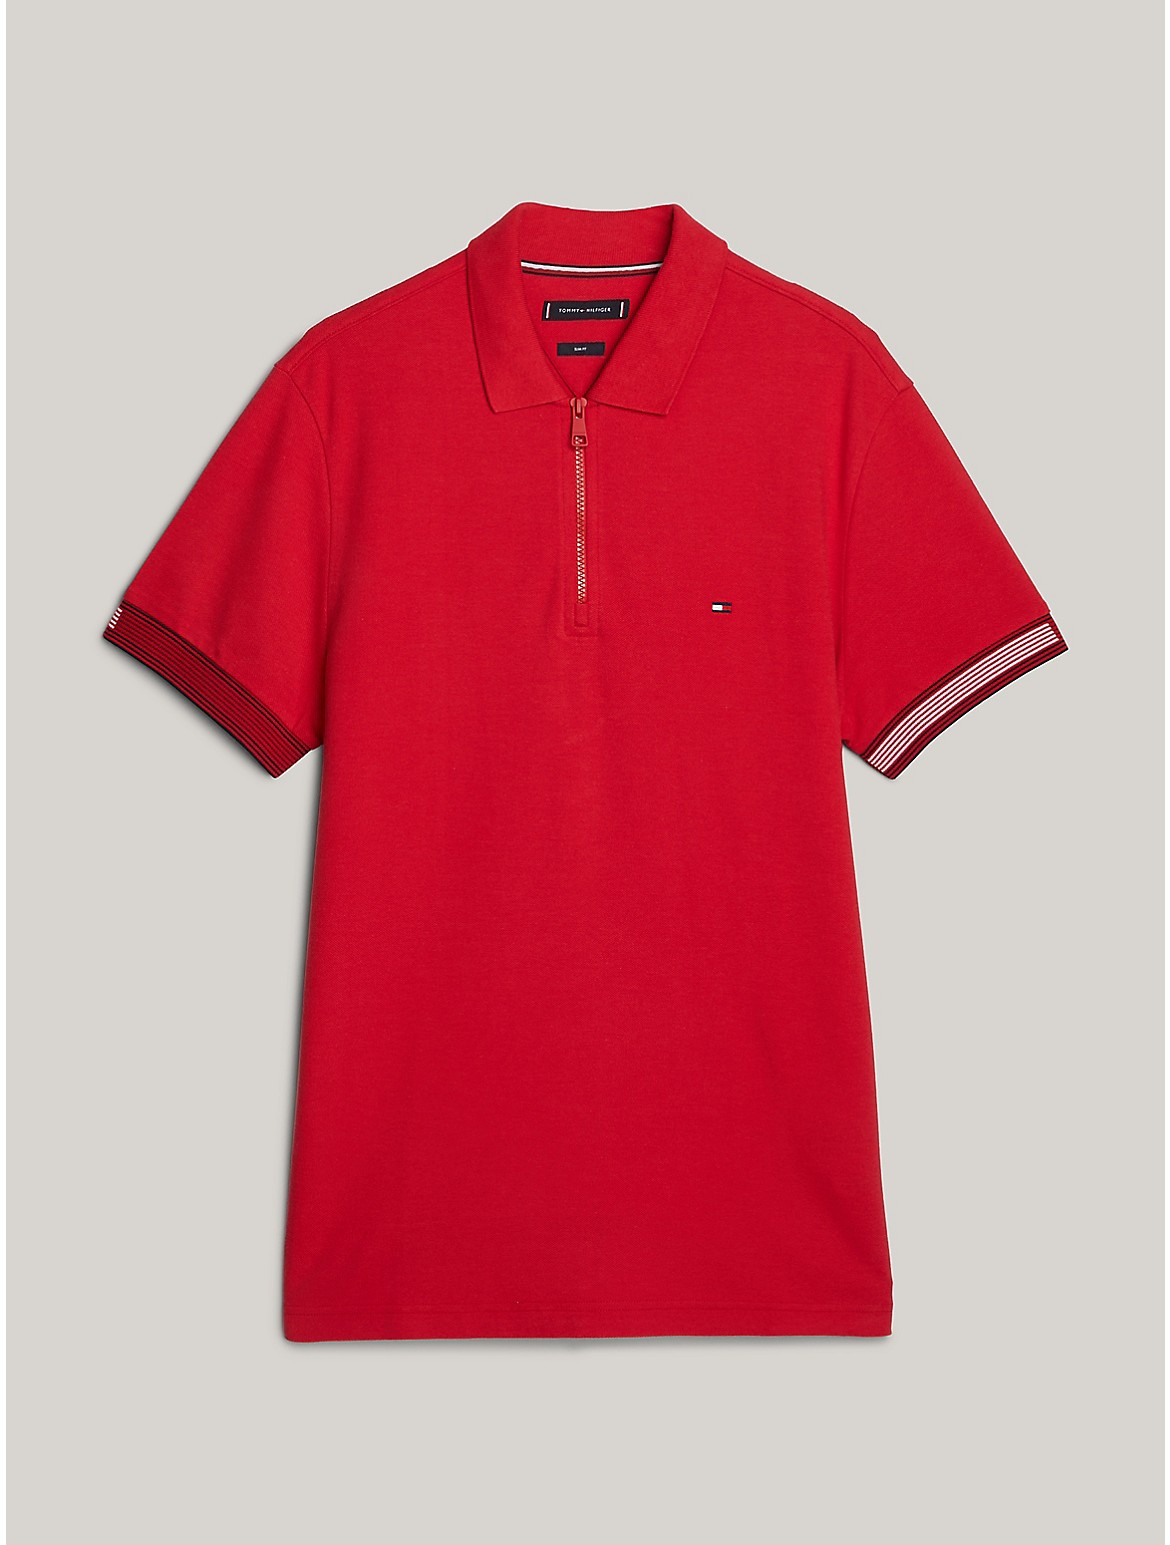 Tommy Hilfiger Men's Slim Fit Flag Tipped Polo